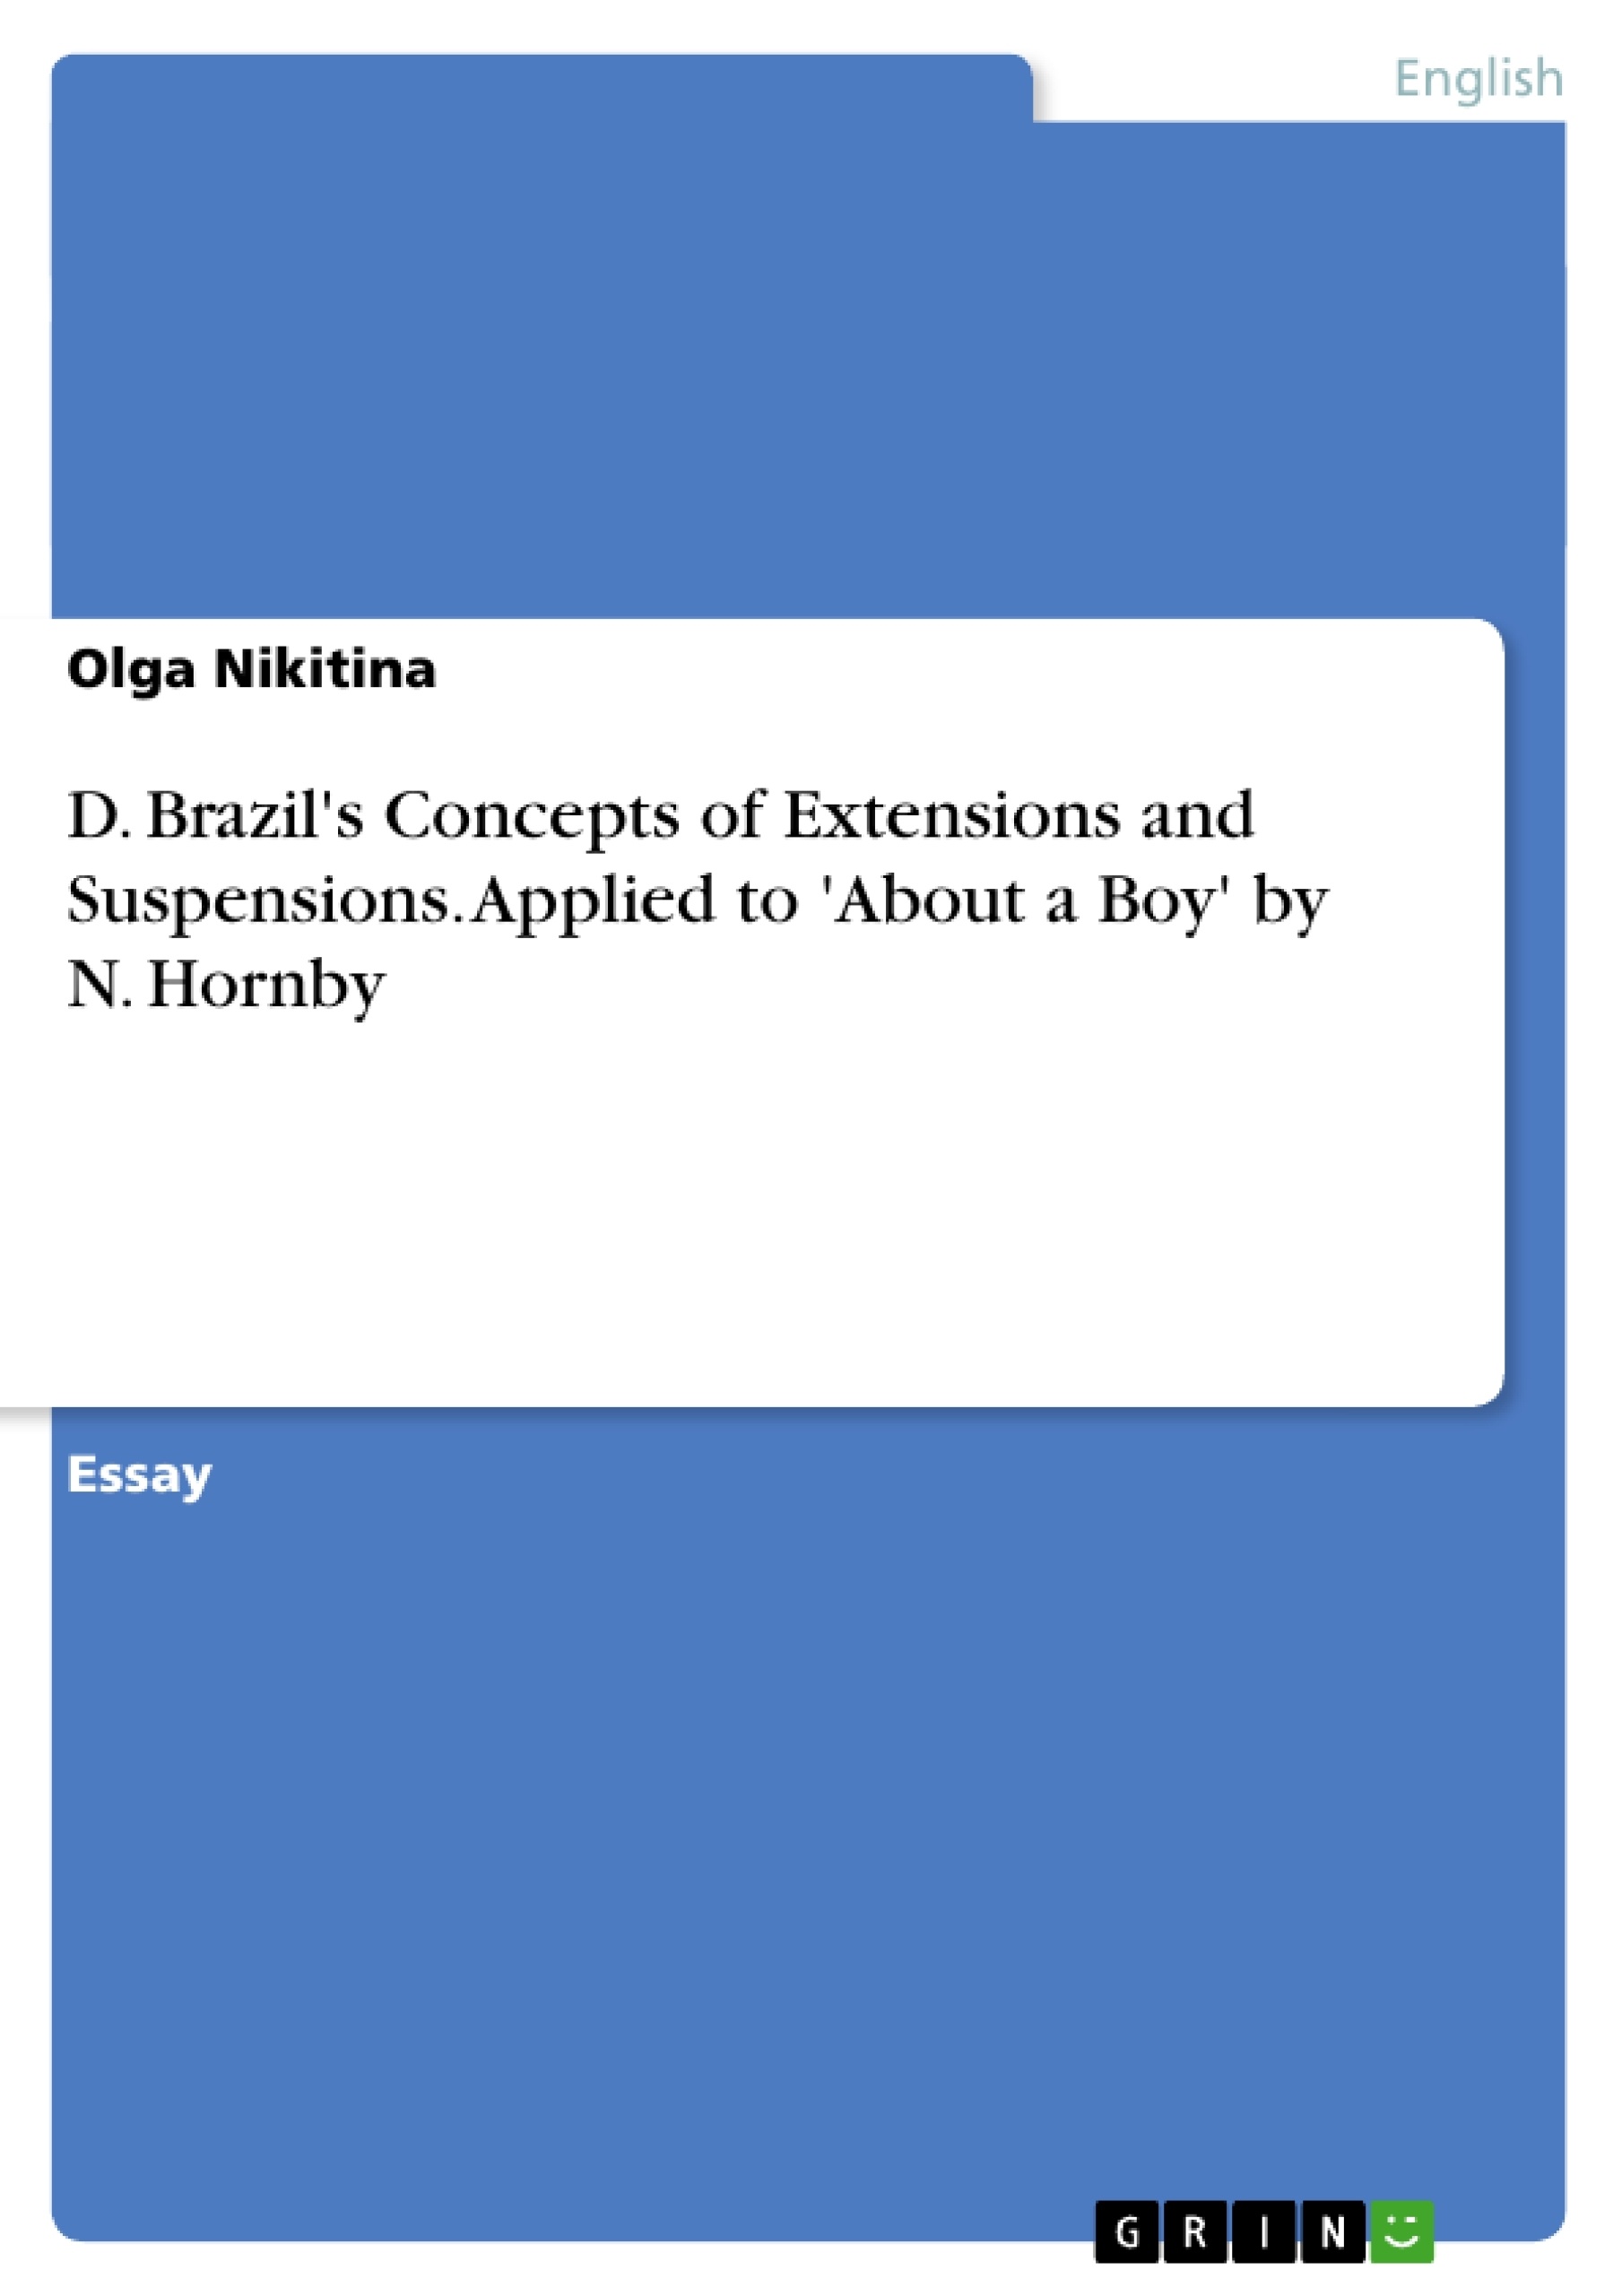 Title: D. Brazil's Concepts of Extensions and Suspensions. Applied to 'About a Boy' by N. Hornby